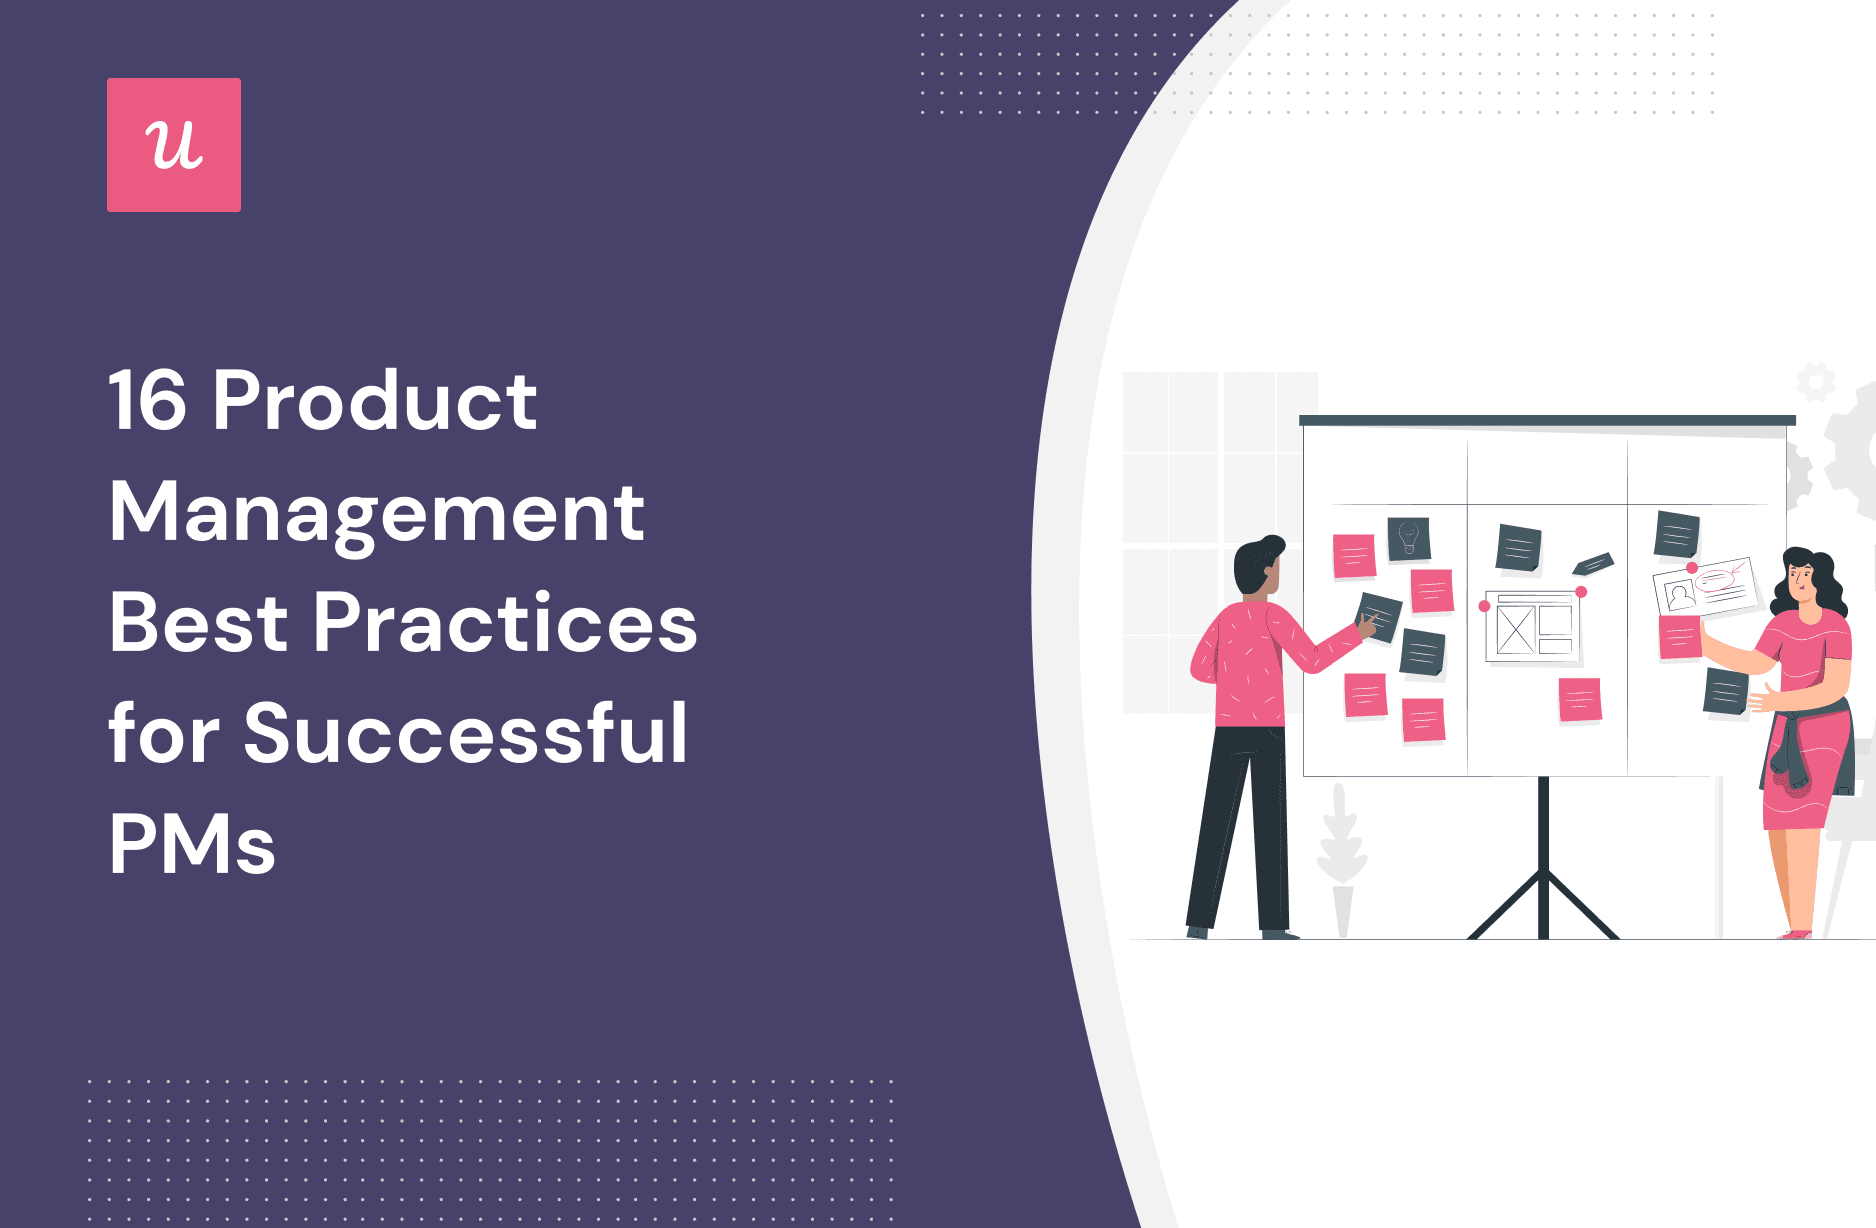 16 Product Management Best Practices For Successful PMs cover